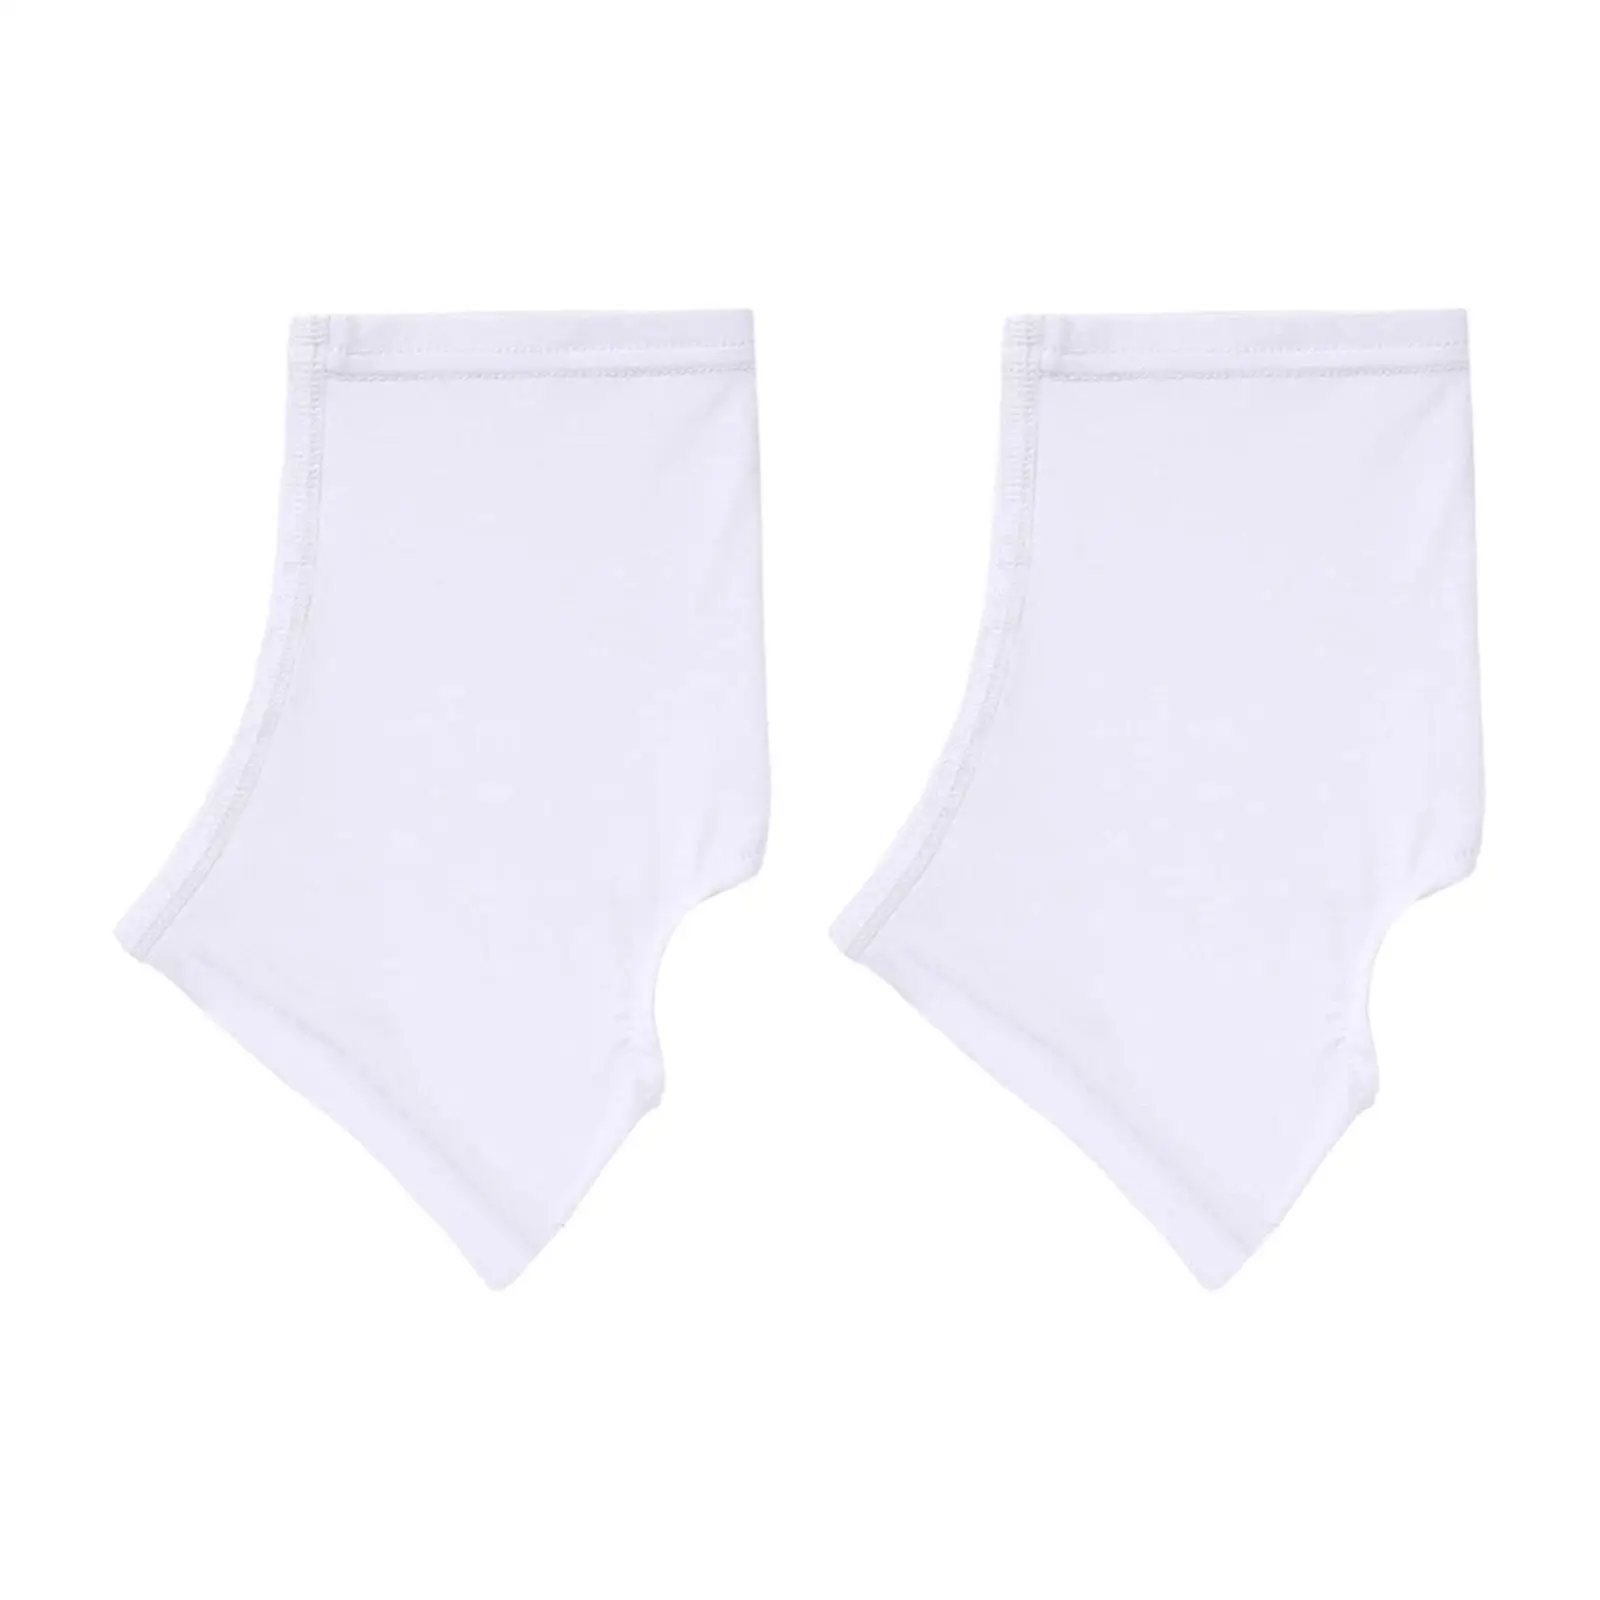 2Pcs Spats Cleat Covers Youth Wraps Softball Elastic Adults Keeps Cleats Tied Turf Pellets Out 1 Pair Cleat Sleeves